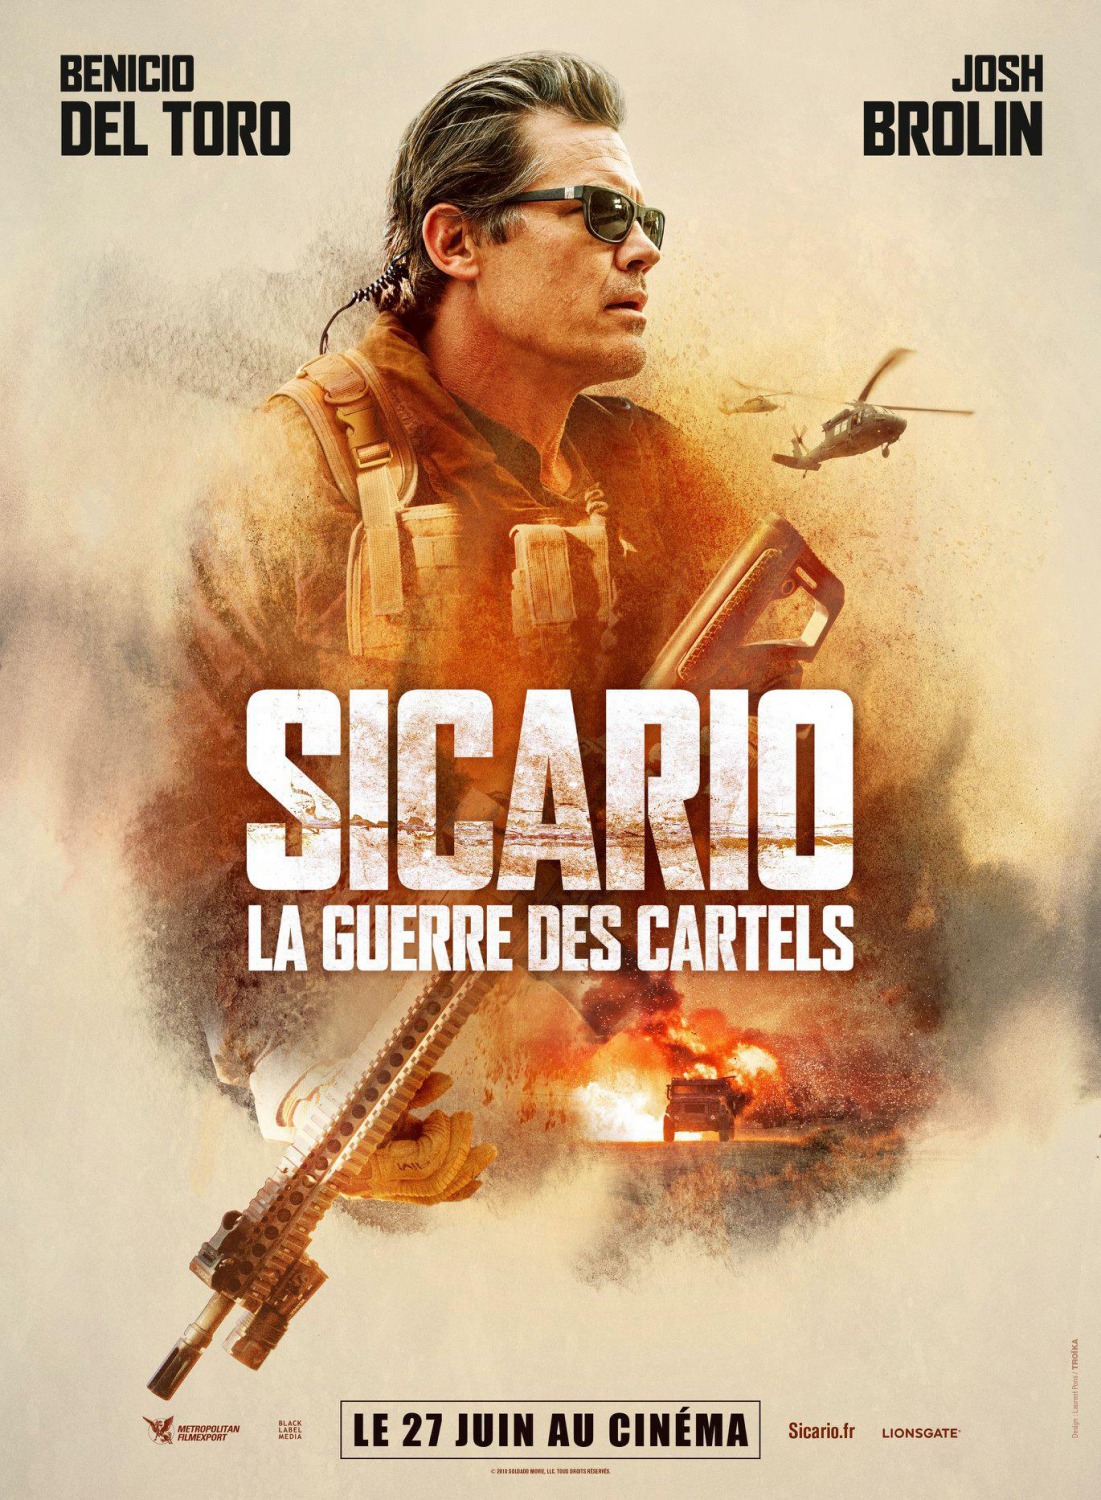 Sicario Day Of The Soldado Official Poster Wallpapers